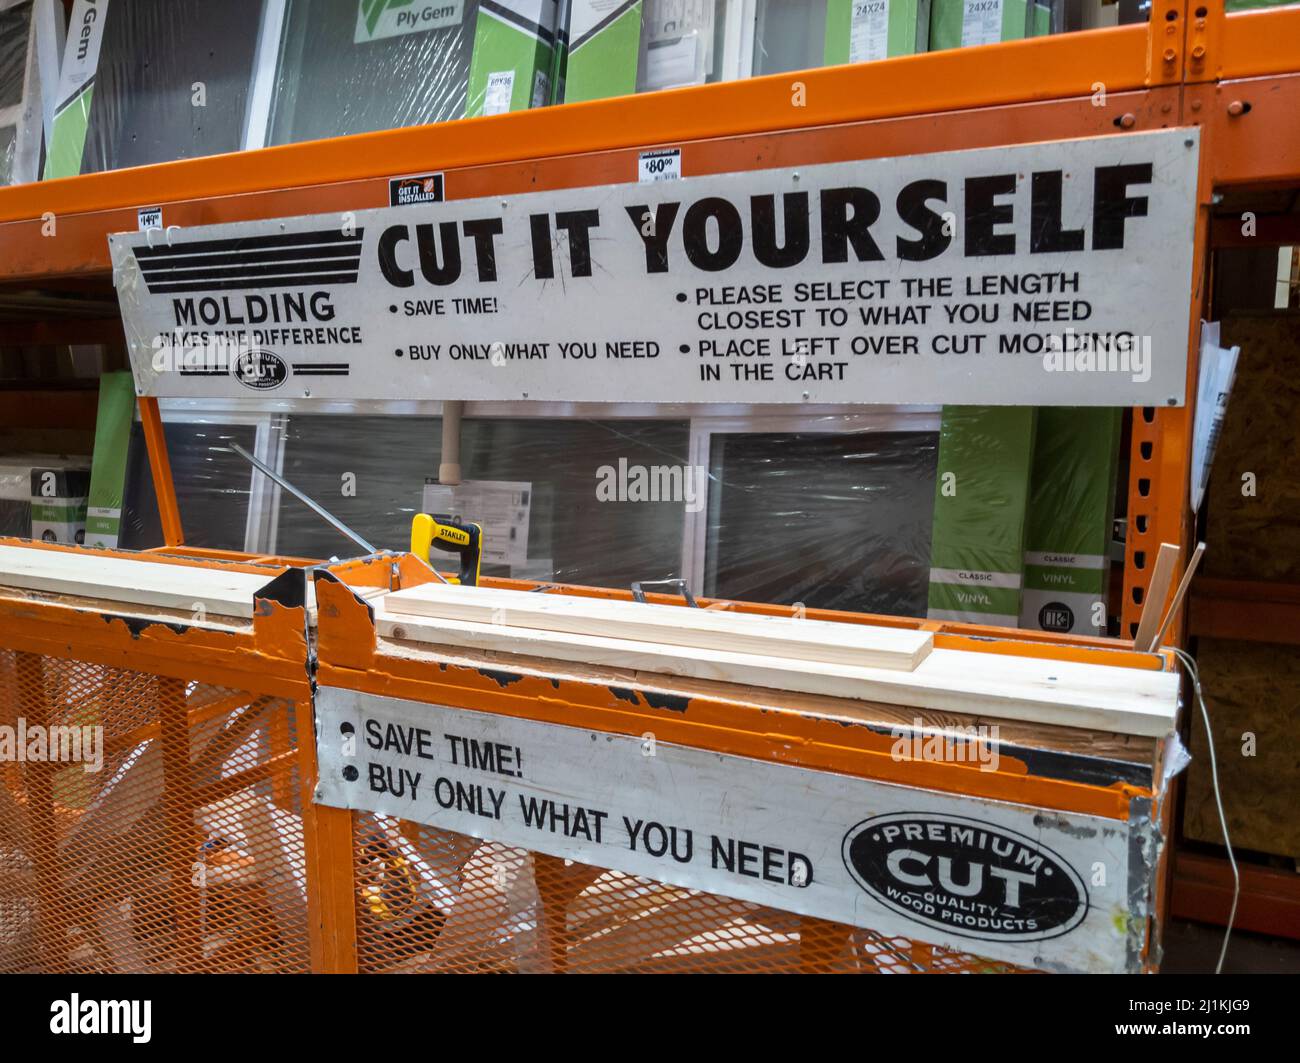 Bothell, WA USA - circa April 2021: 'Cut It Yourself' station inside Home Depot, where customers can create the length of wood they need. Stock Photo